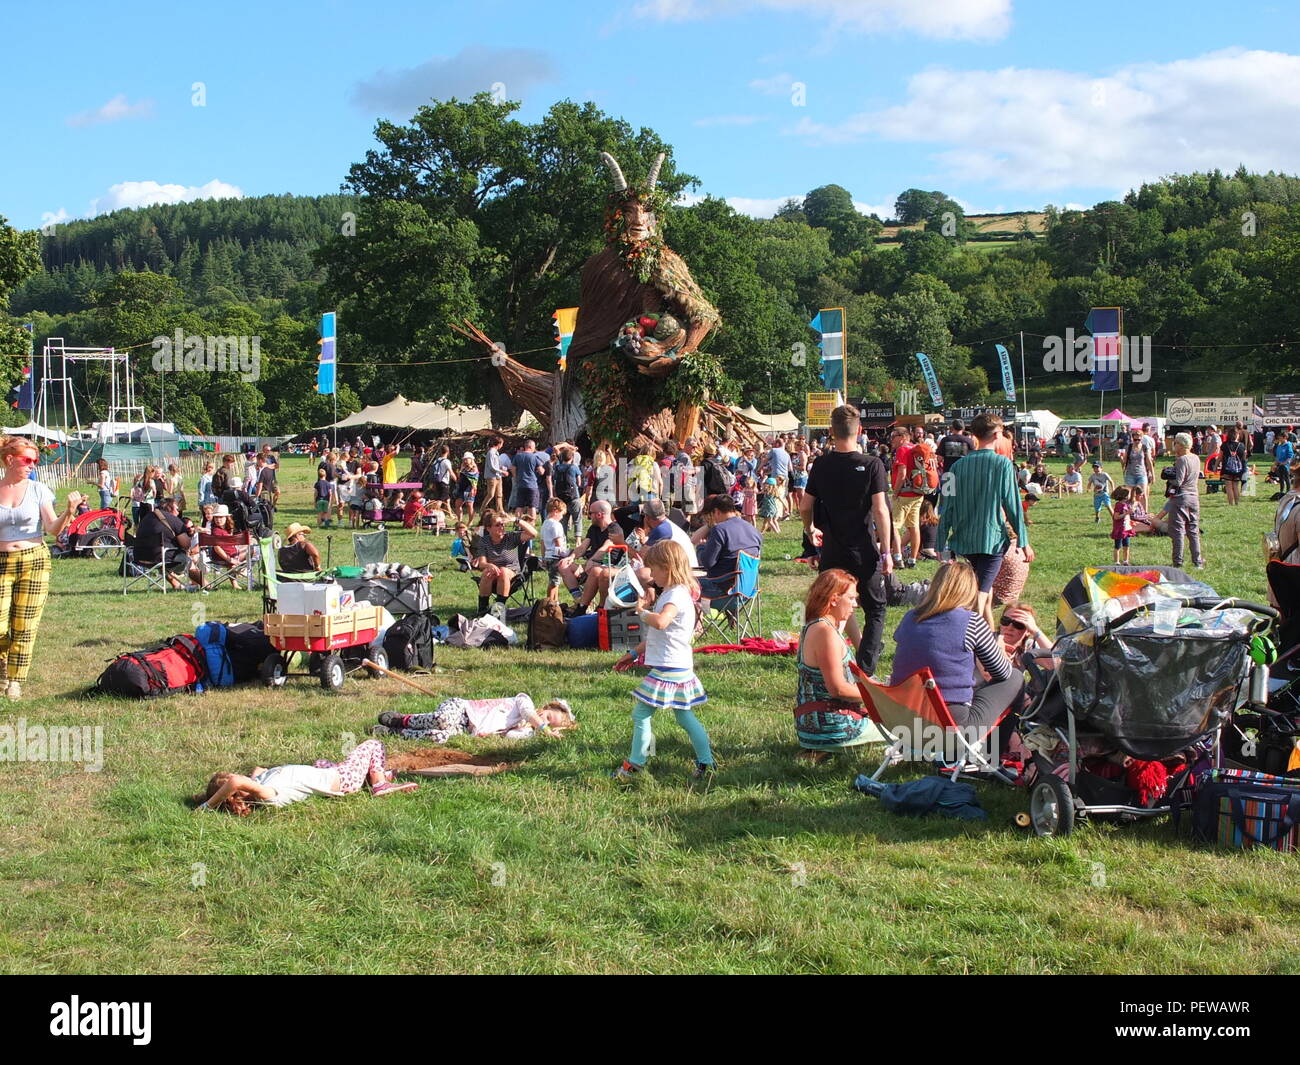 Impressive Green Man sculpture built by Pyrite Creative for the Green Man festival held in Wales. It is ceremonially burnt at the end of the festival. Stock Photo